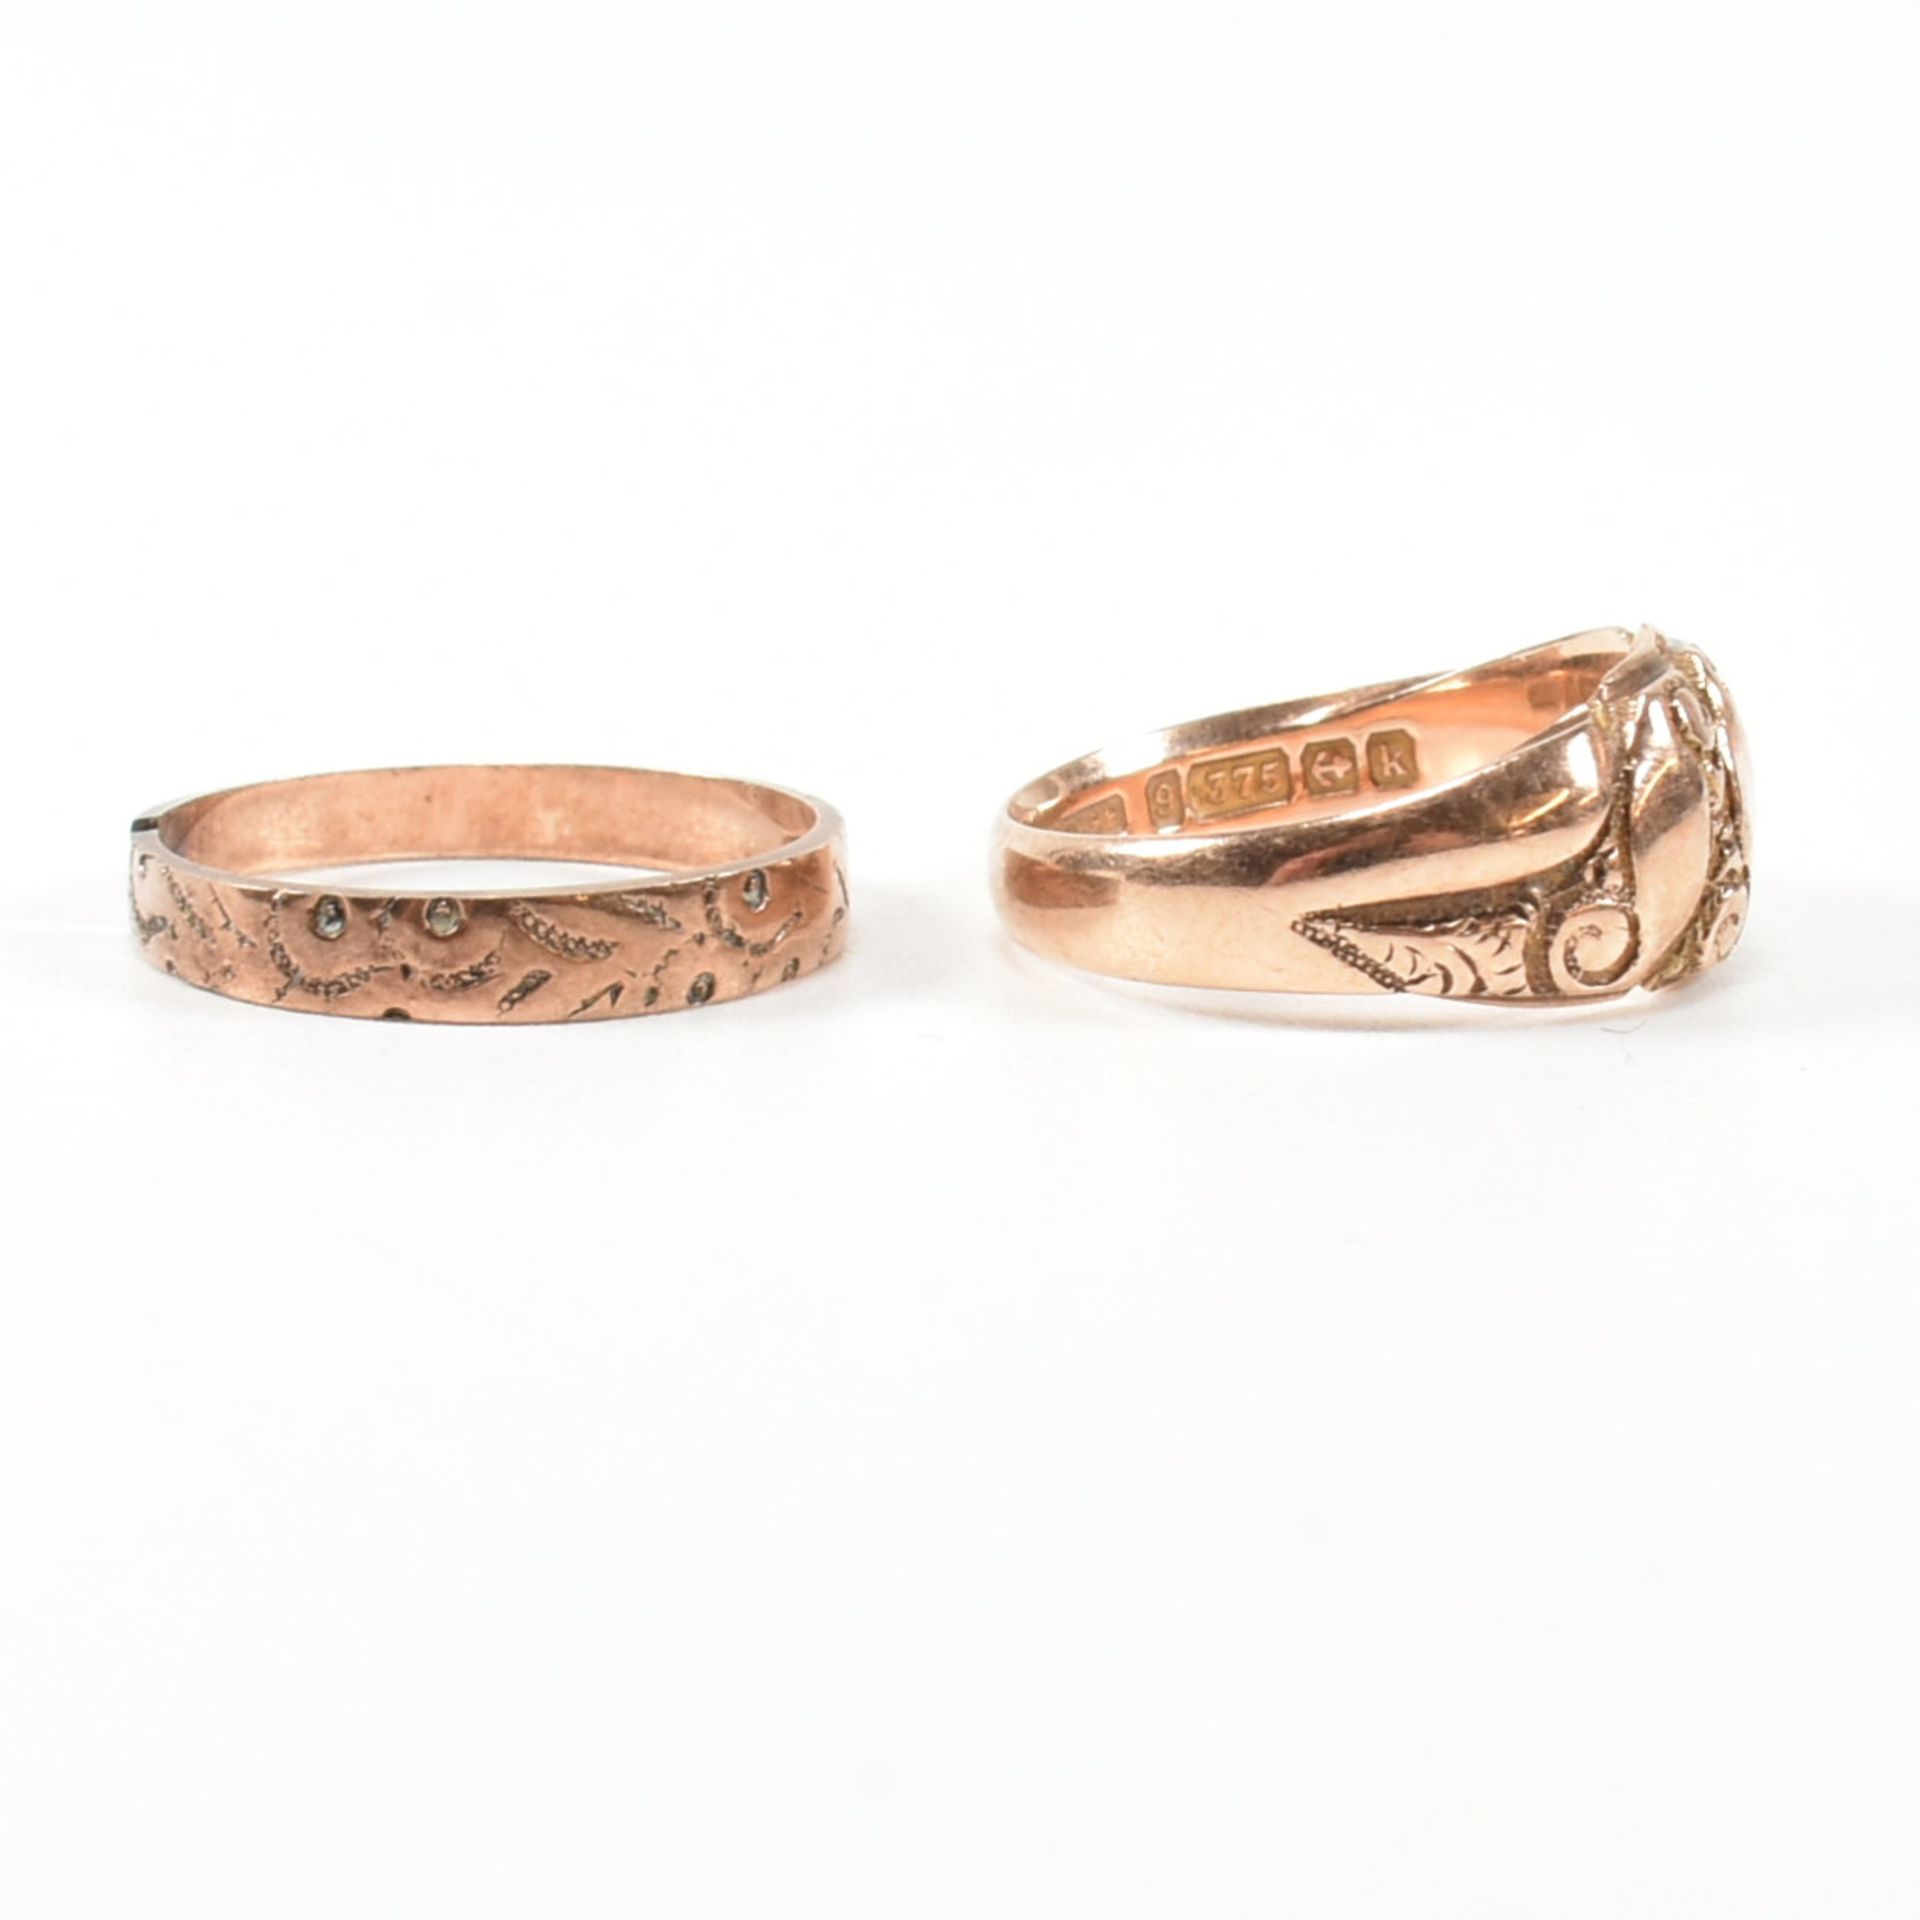 EDWARDIAN HALLMARKED 9CT ROSE GOLD KEEPER RING & VICTORIAN ENGRAVED BAND RING - Image 2 of 6